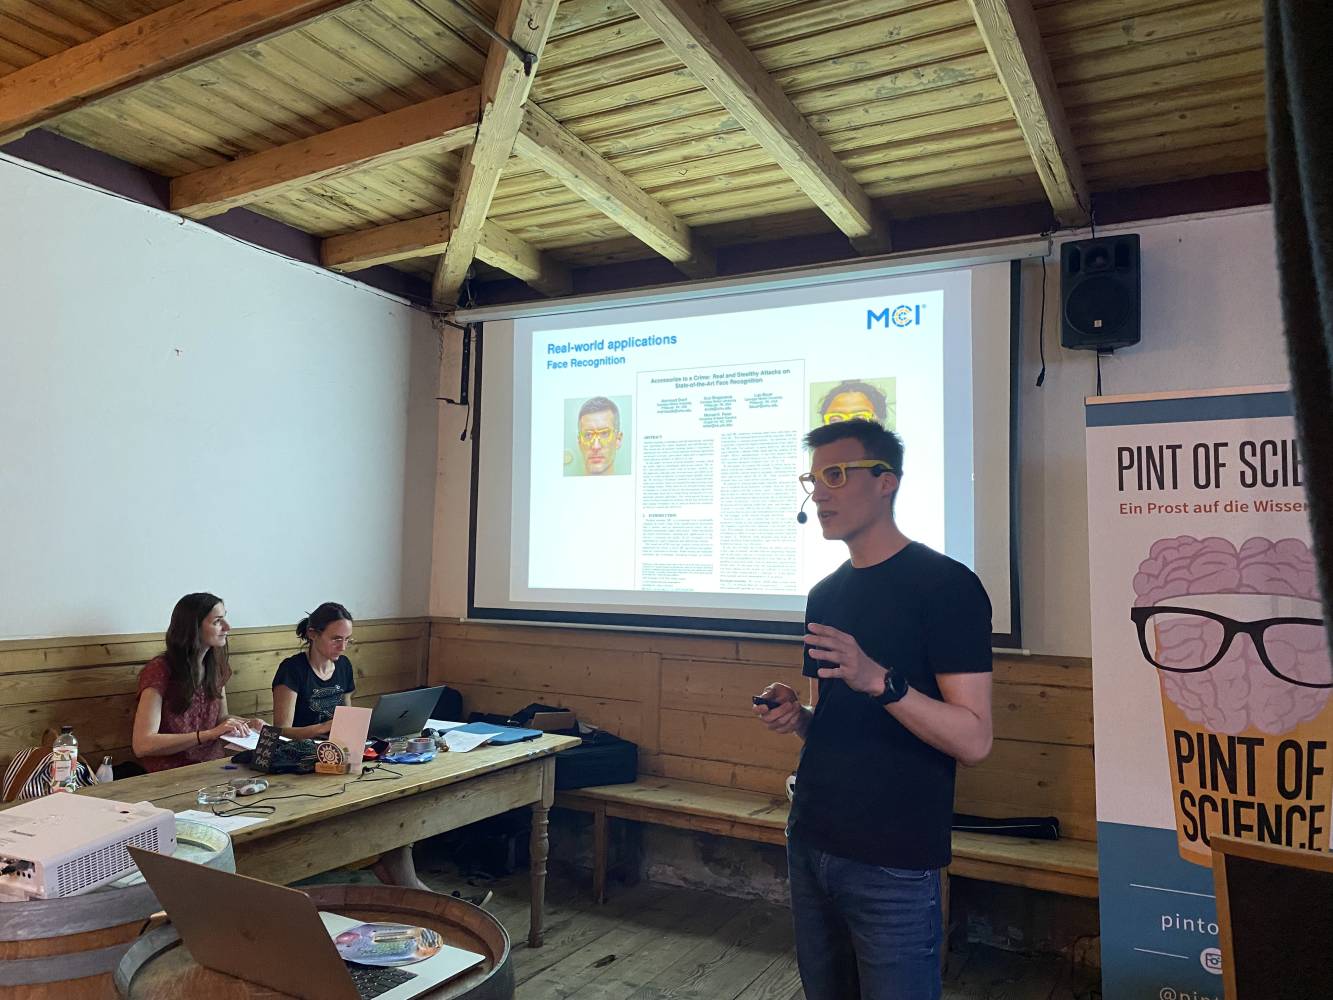 DiBSE Project researcher Martin Nocker presented his latest findings at the Pint of Science Festival under the motto: Cat or Guacamole? How to fool machines that we think of as 'intelligent'.